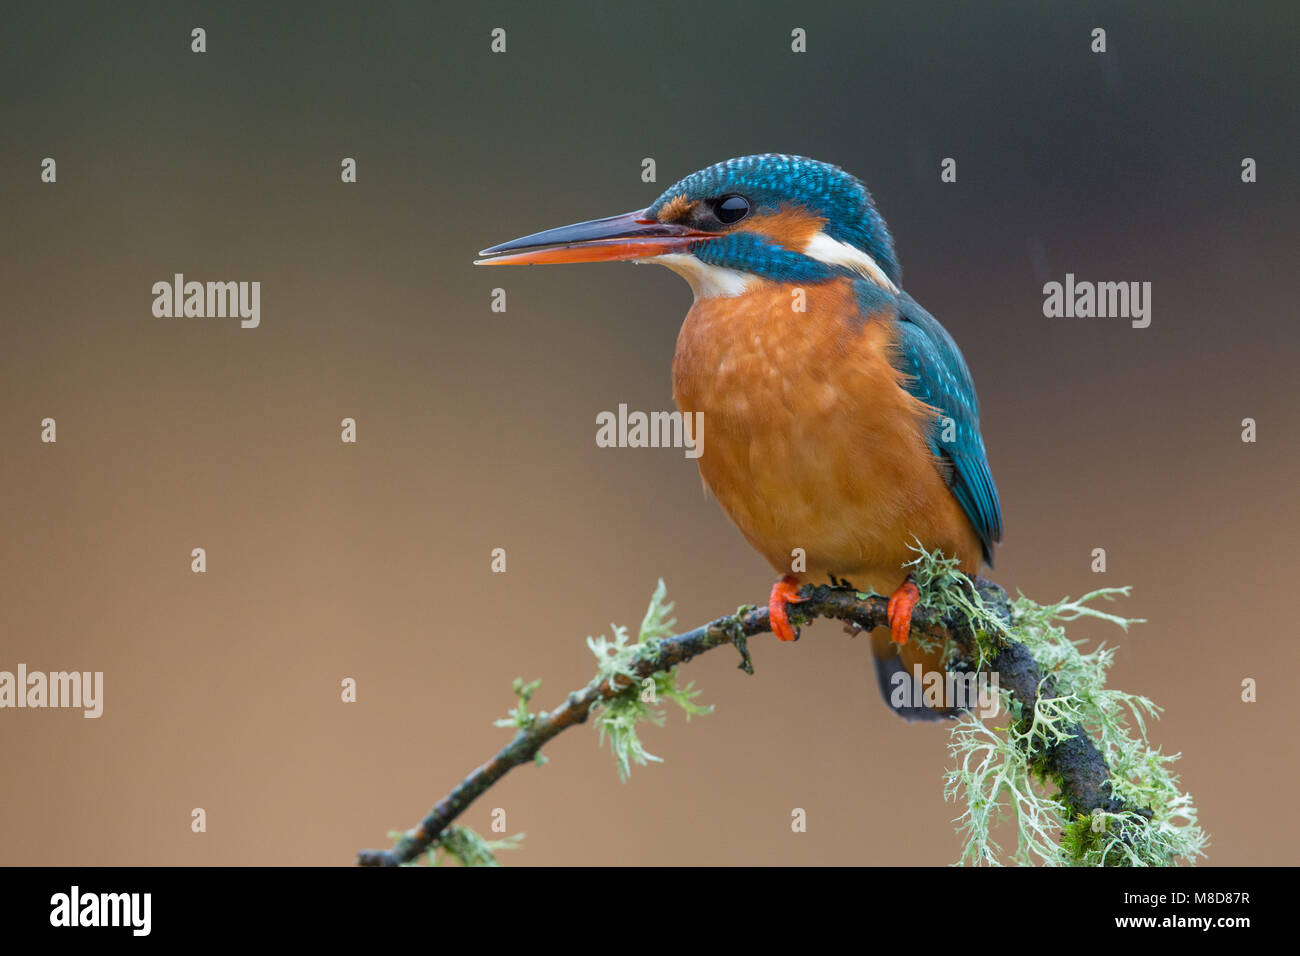 kingfisher perched on lichen covered twig Stock Photo